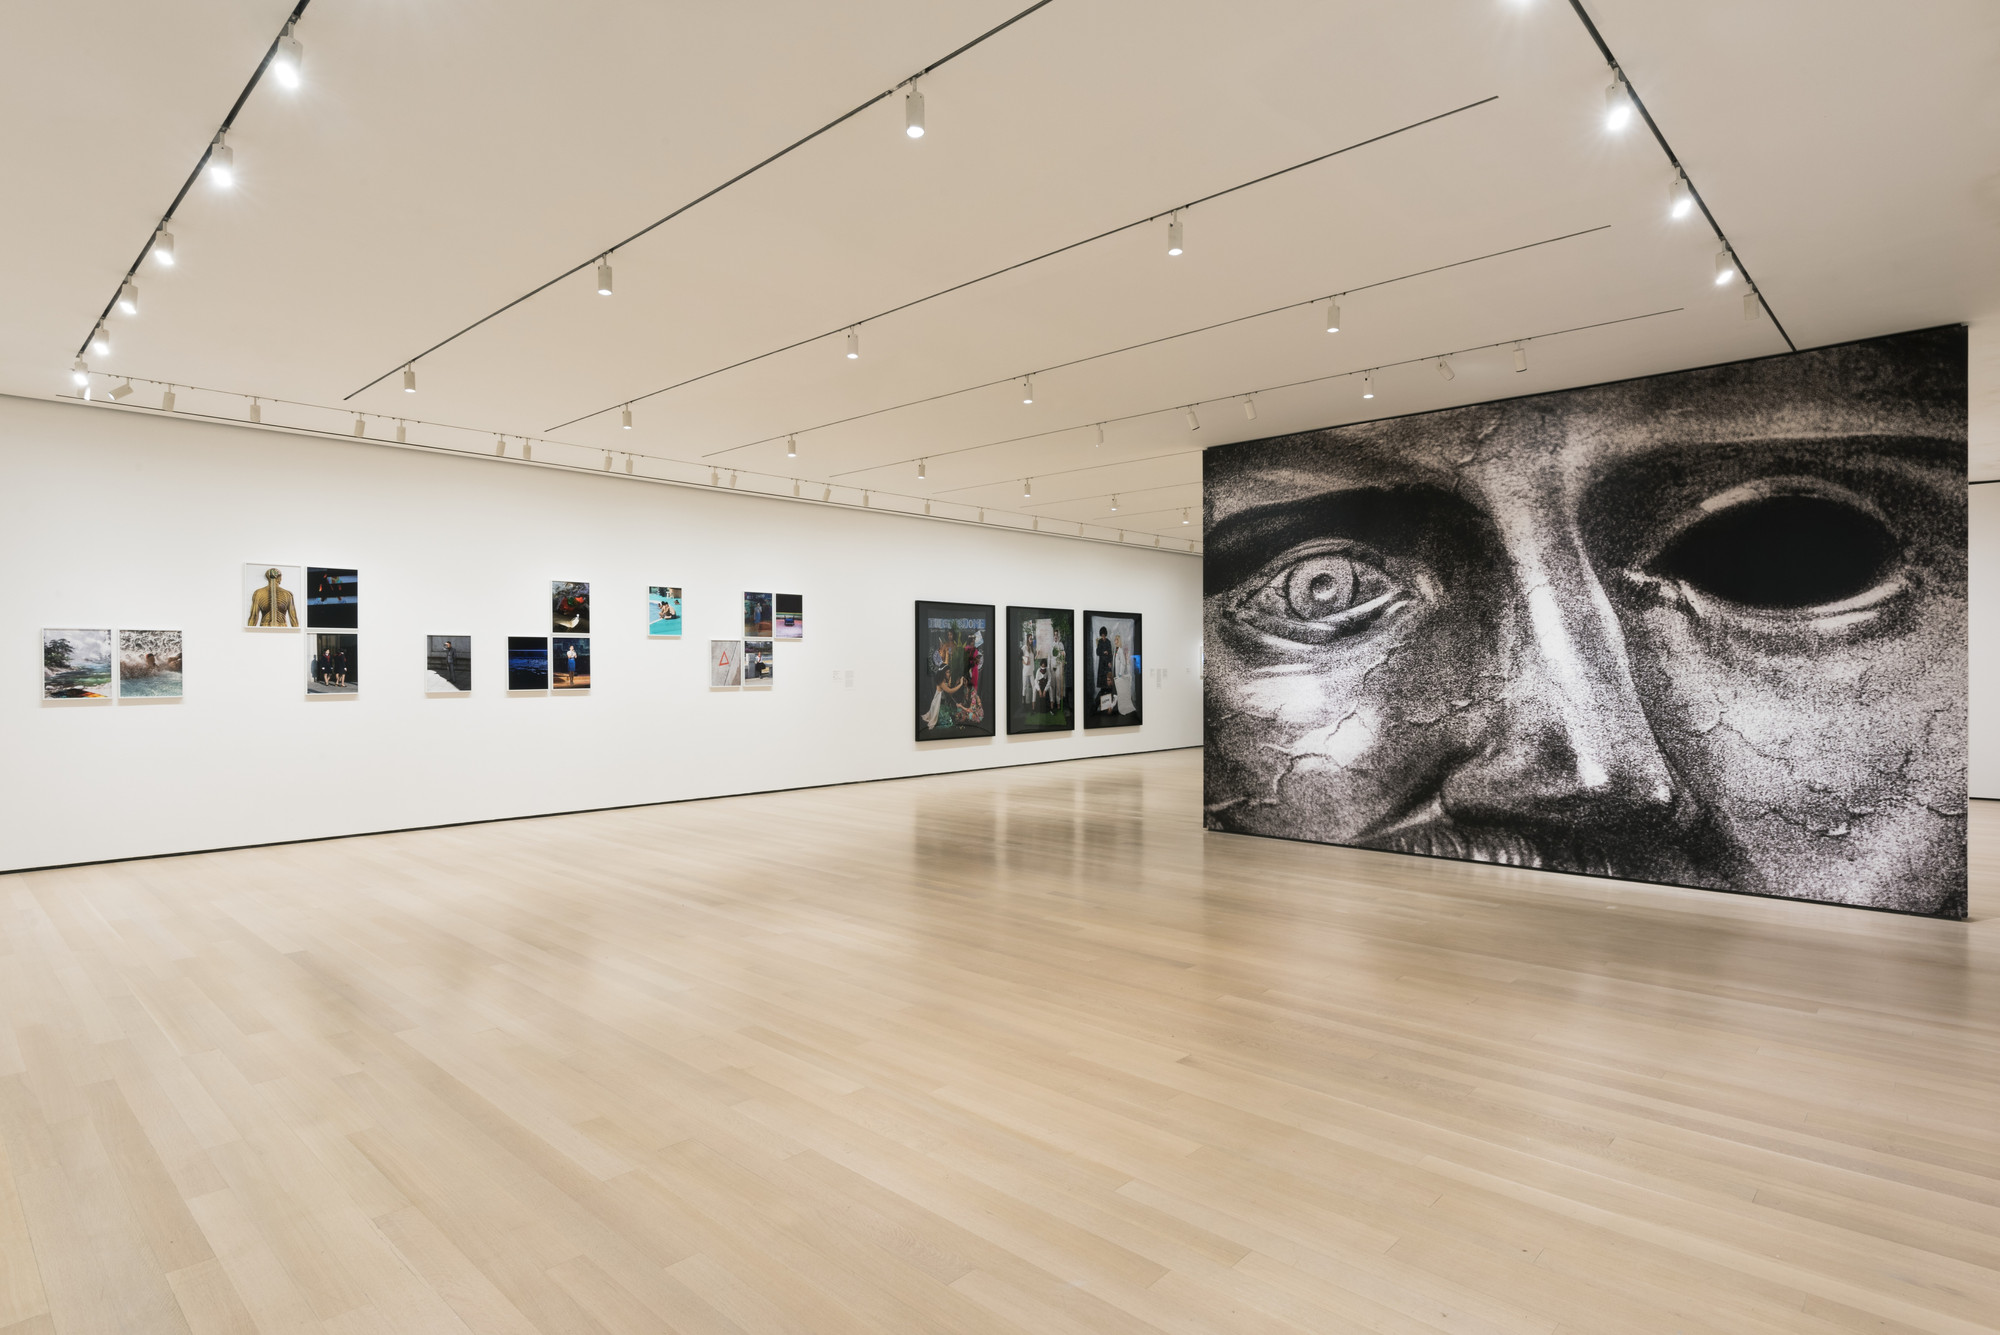 Installation view of the exhibition, "Being: New Photography |